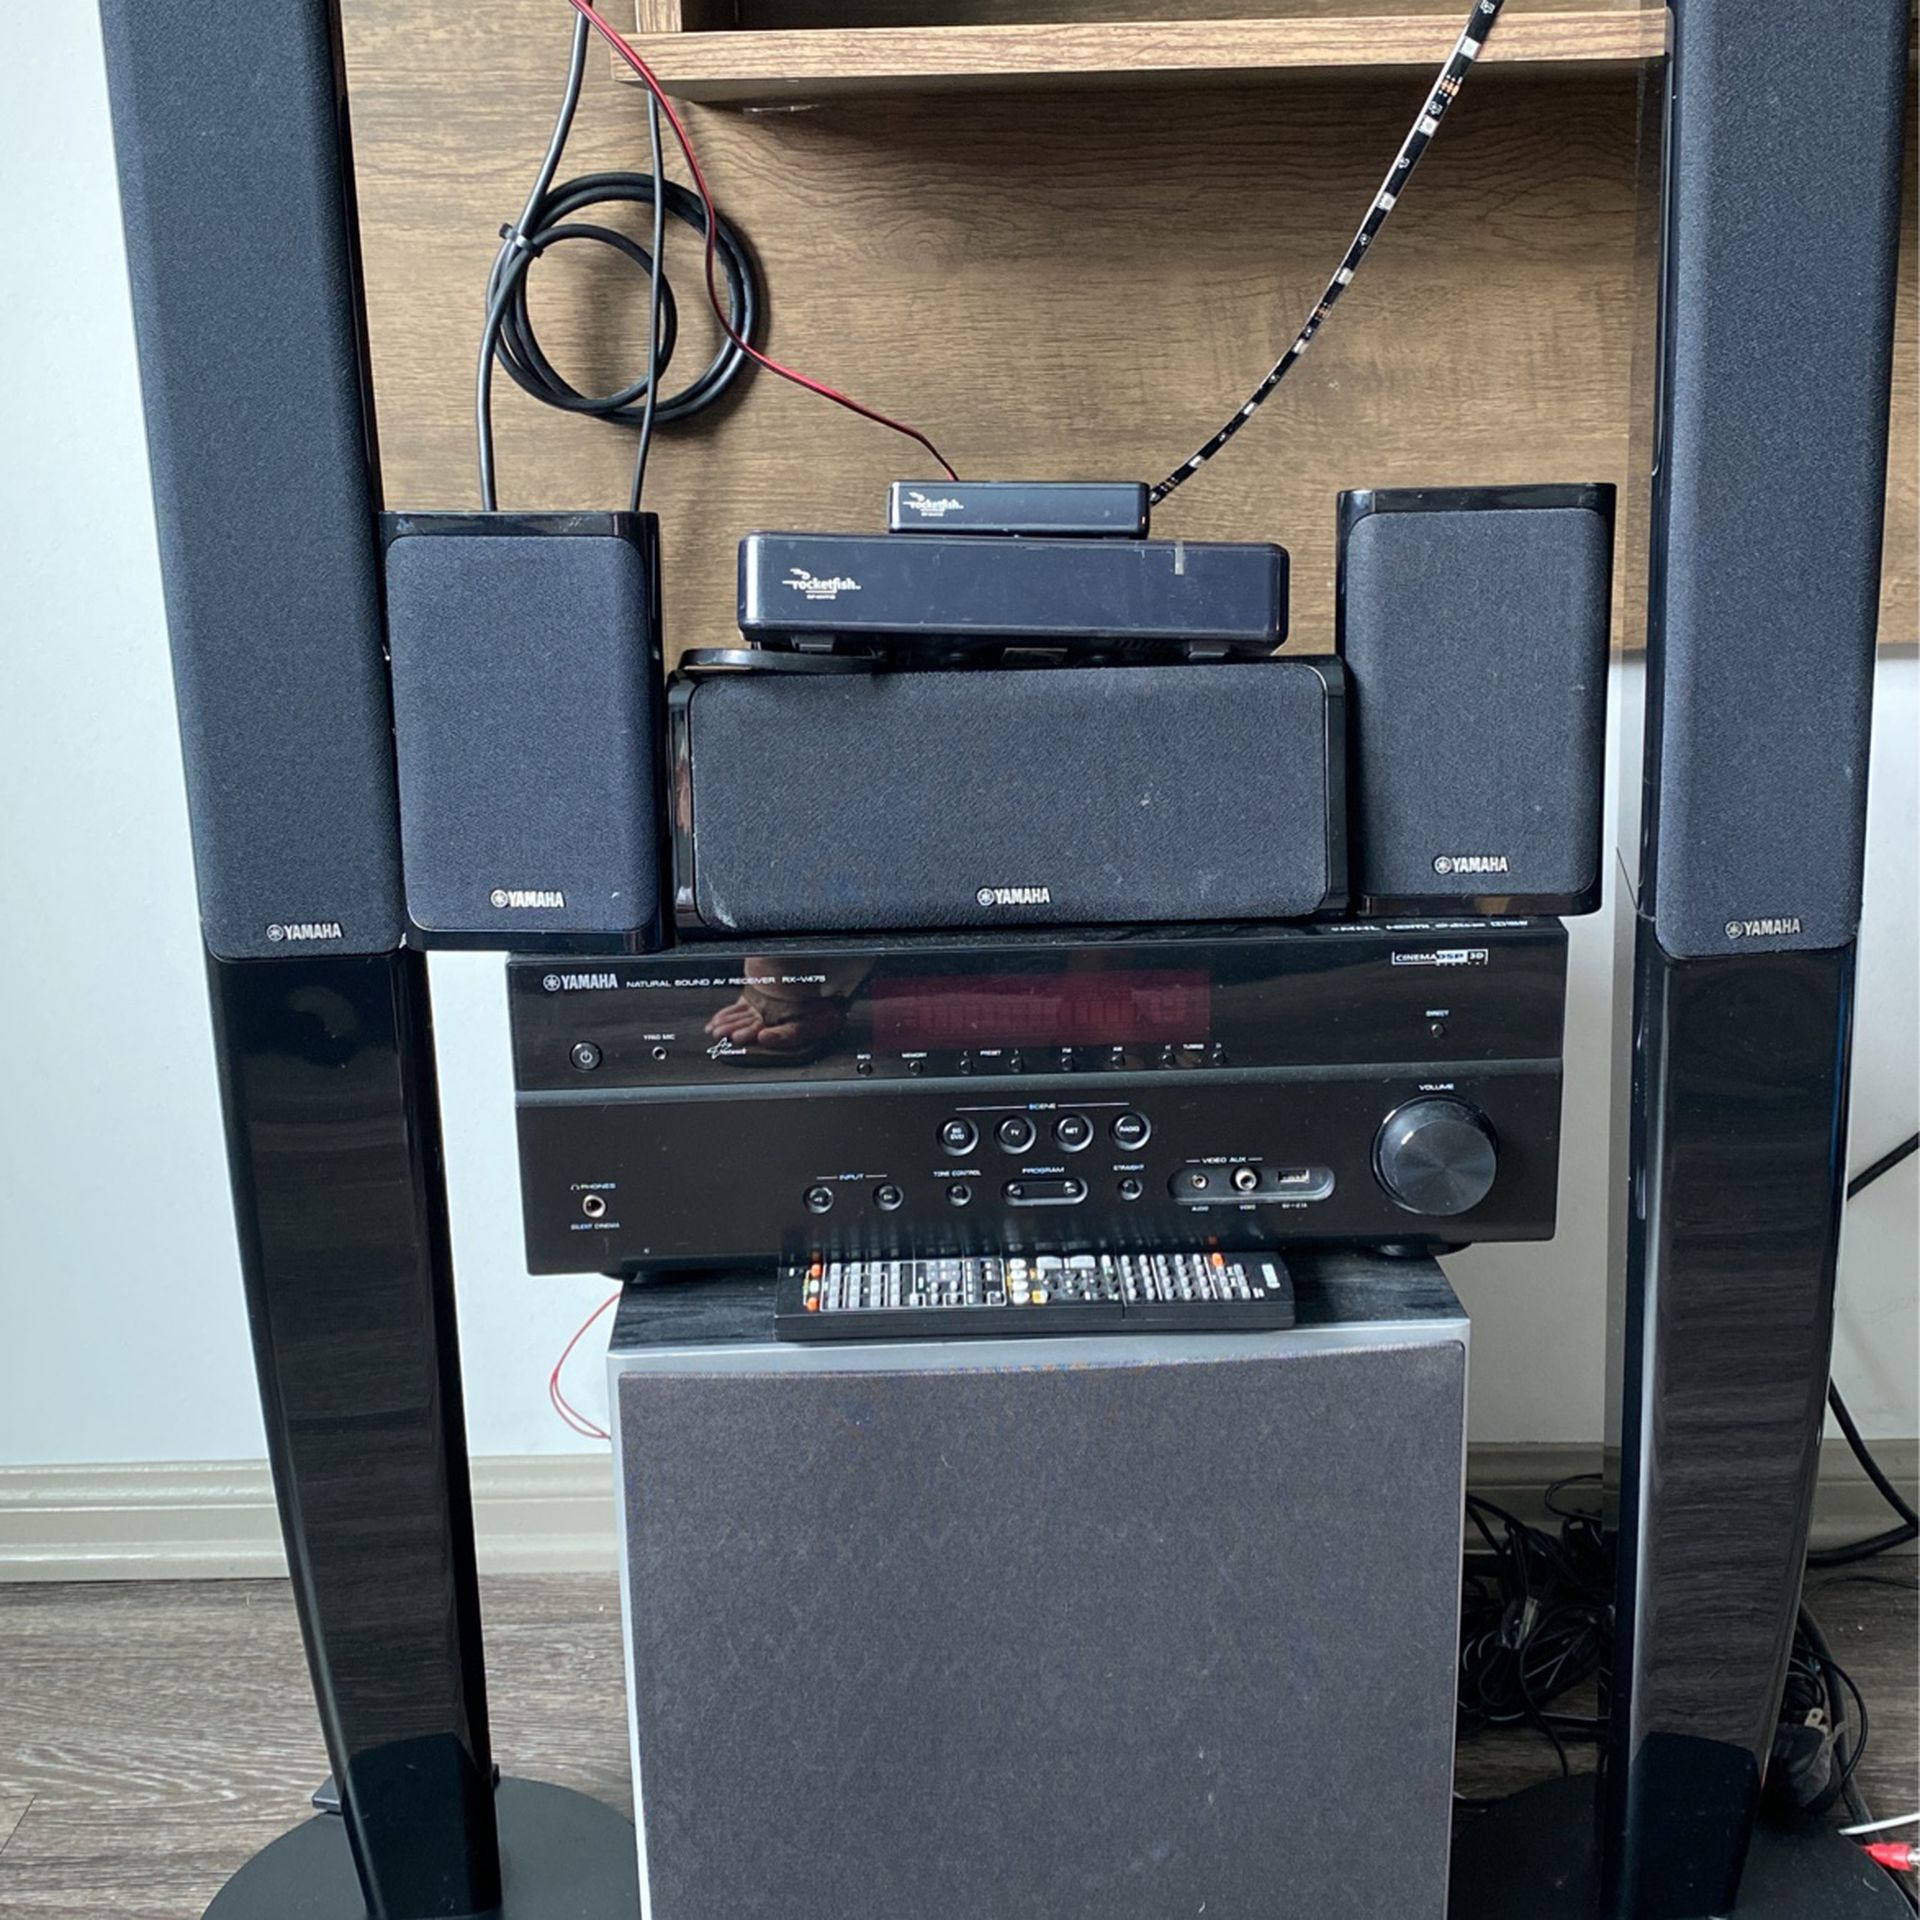 Yamaha Surround Sound System With Polk Audio  Subwoofer And Rocket fish Connection  